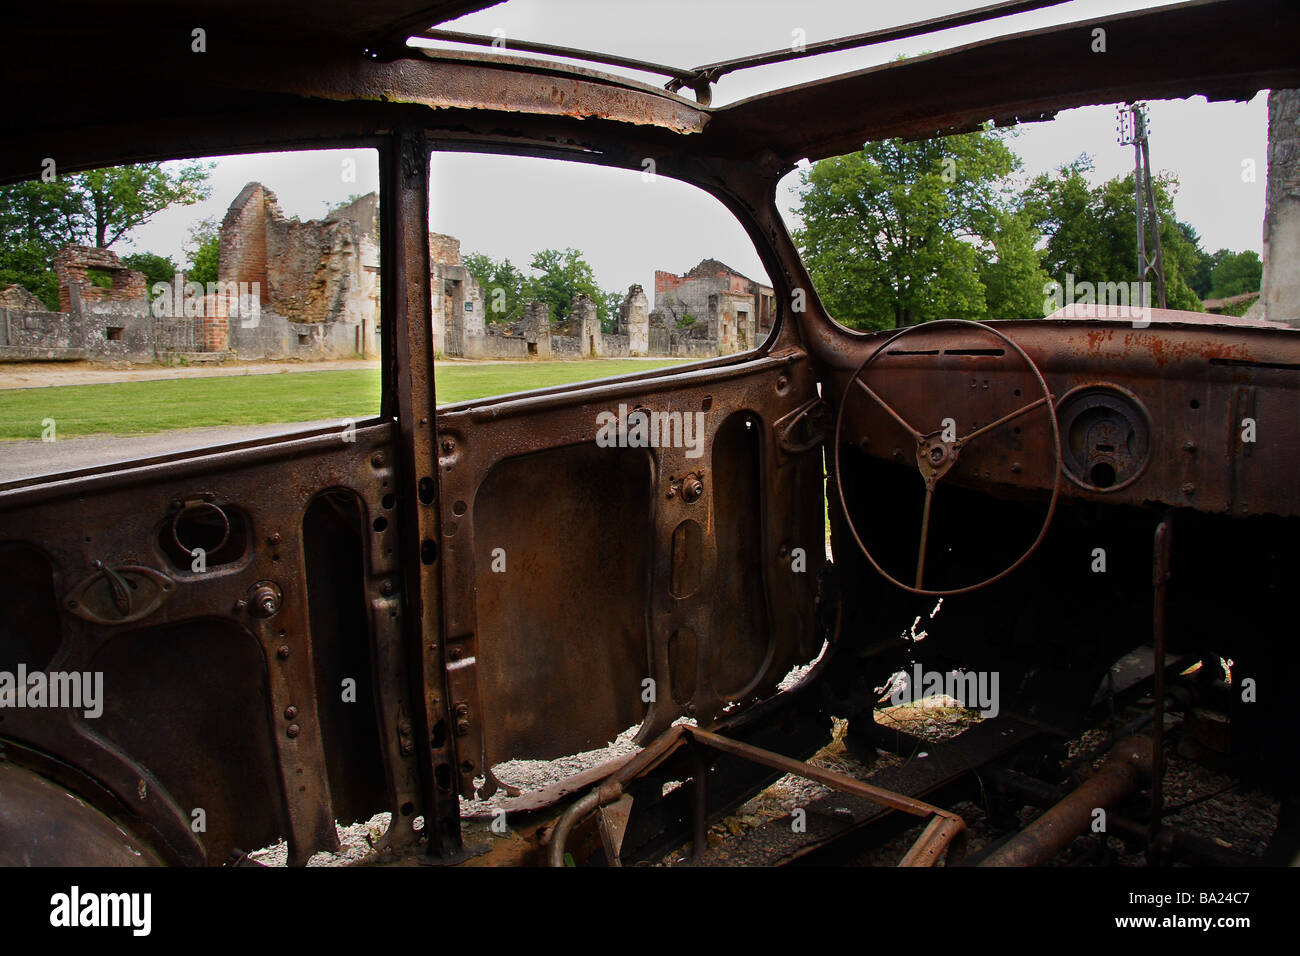 A destroyed car in the martyred village of Oradour sur Glane Taken from inside the car Limousin France Stock Photo